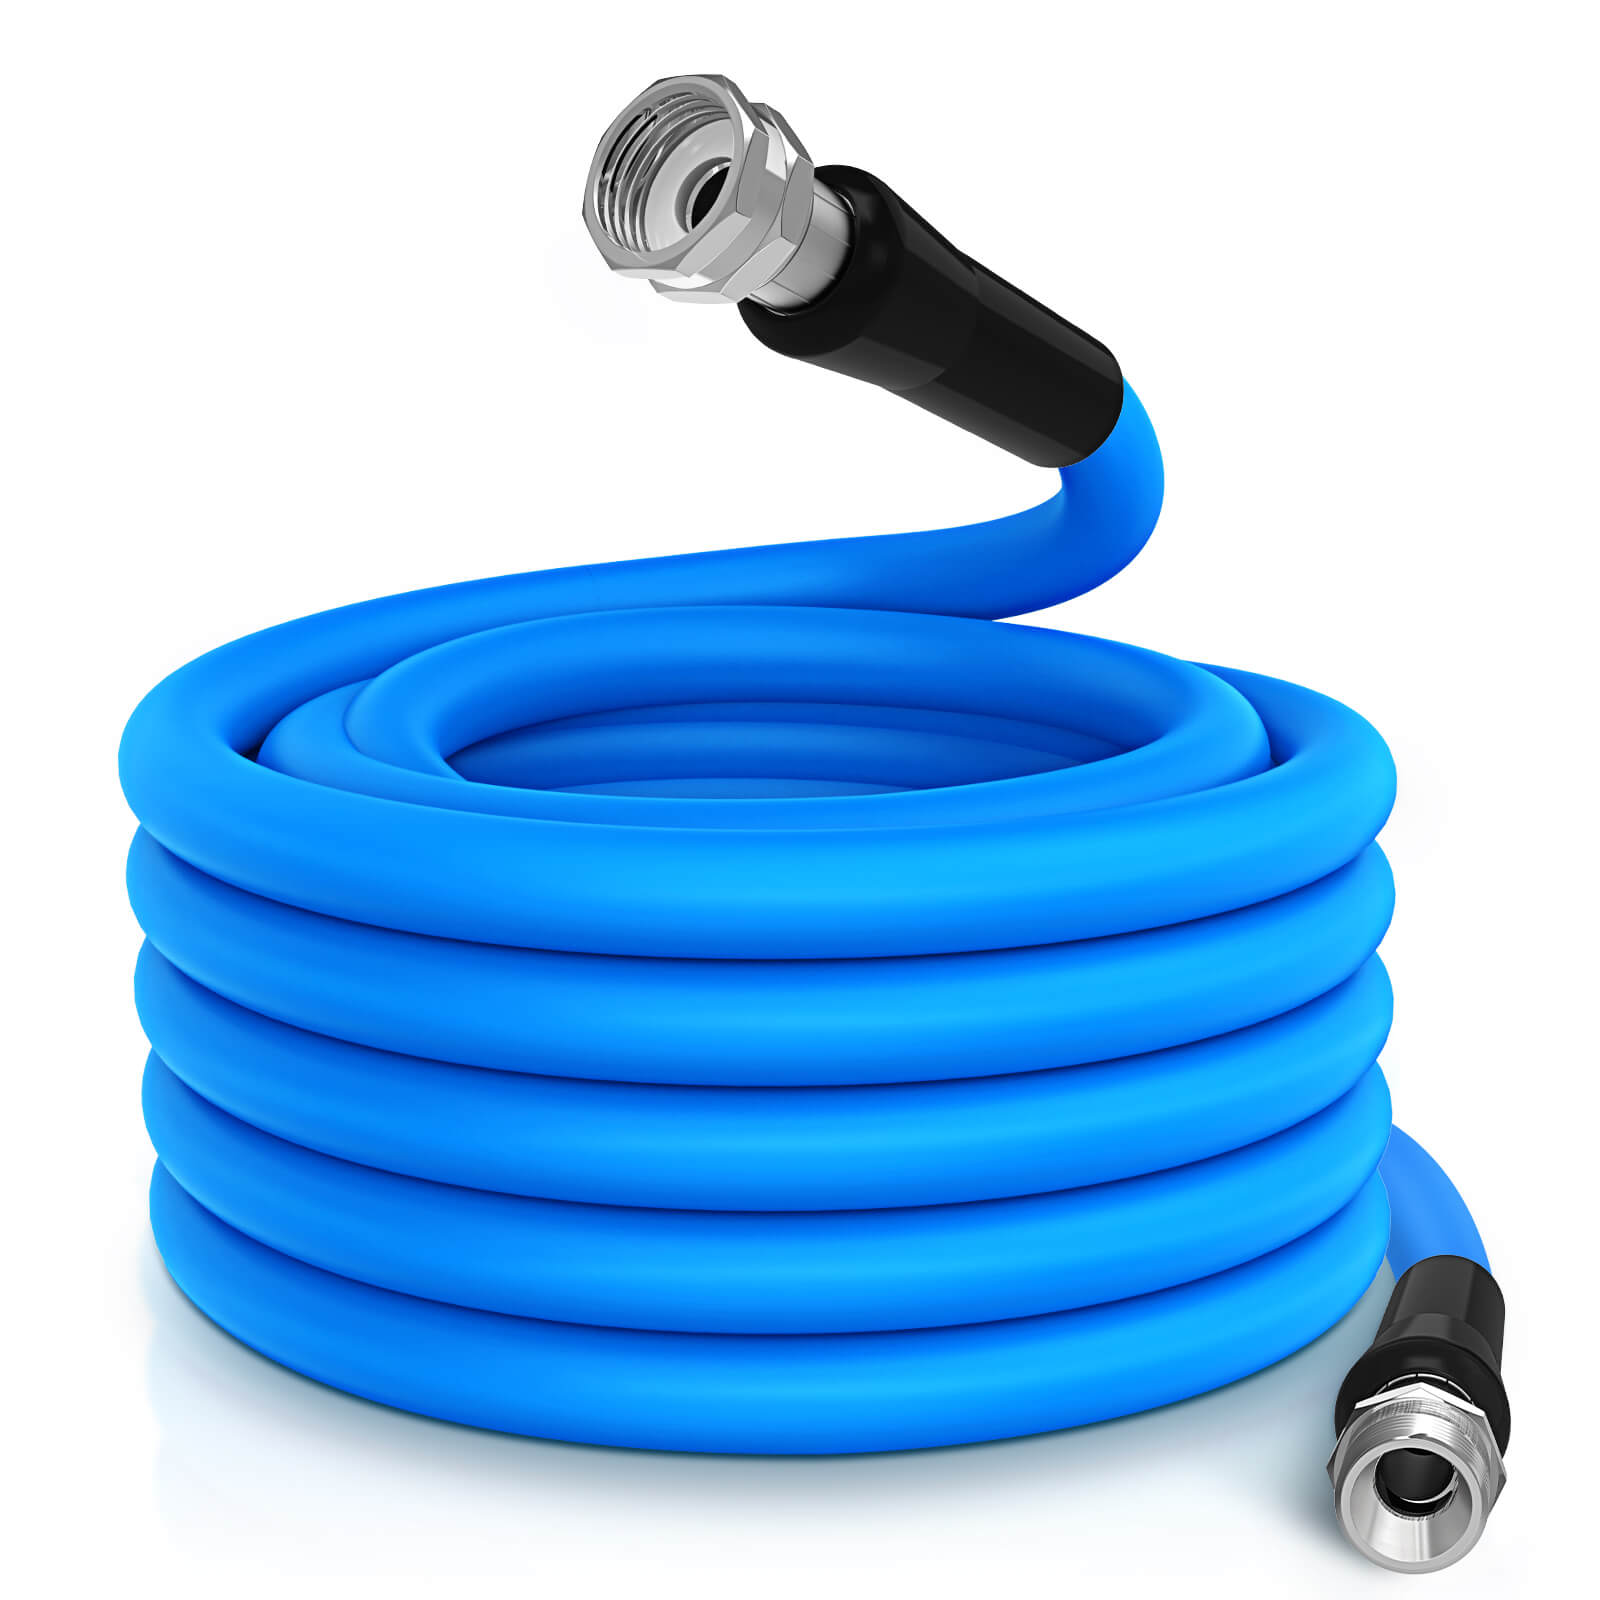 25FT RV Drinking Water Hose, 5/8" Fresh Water Hose MICTUNING